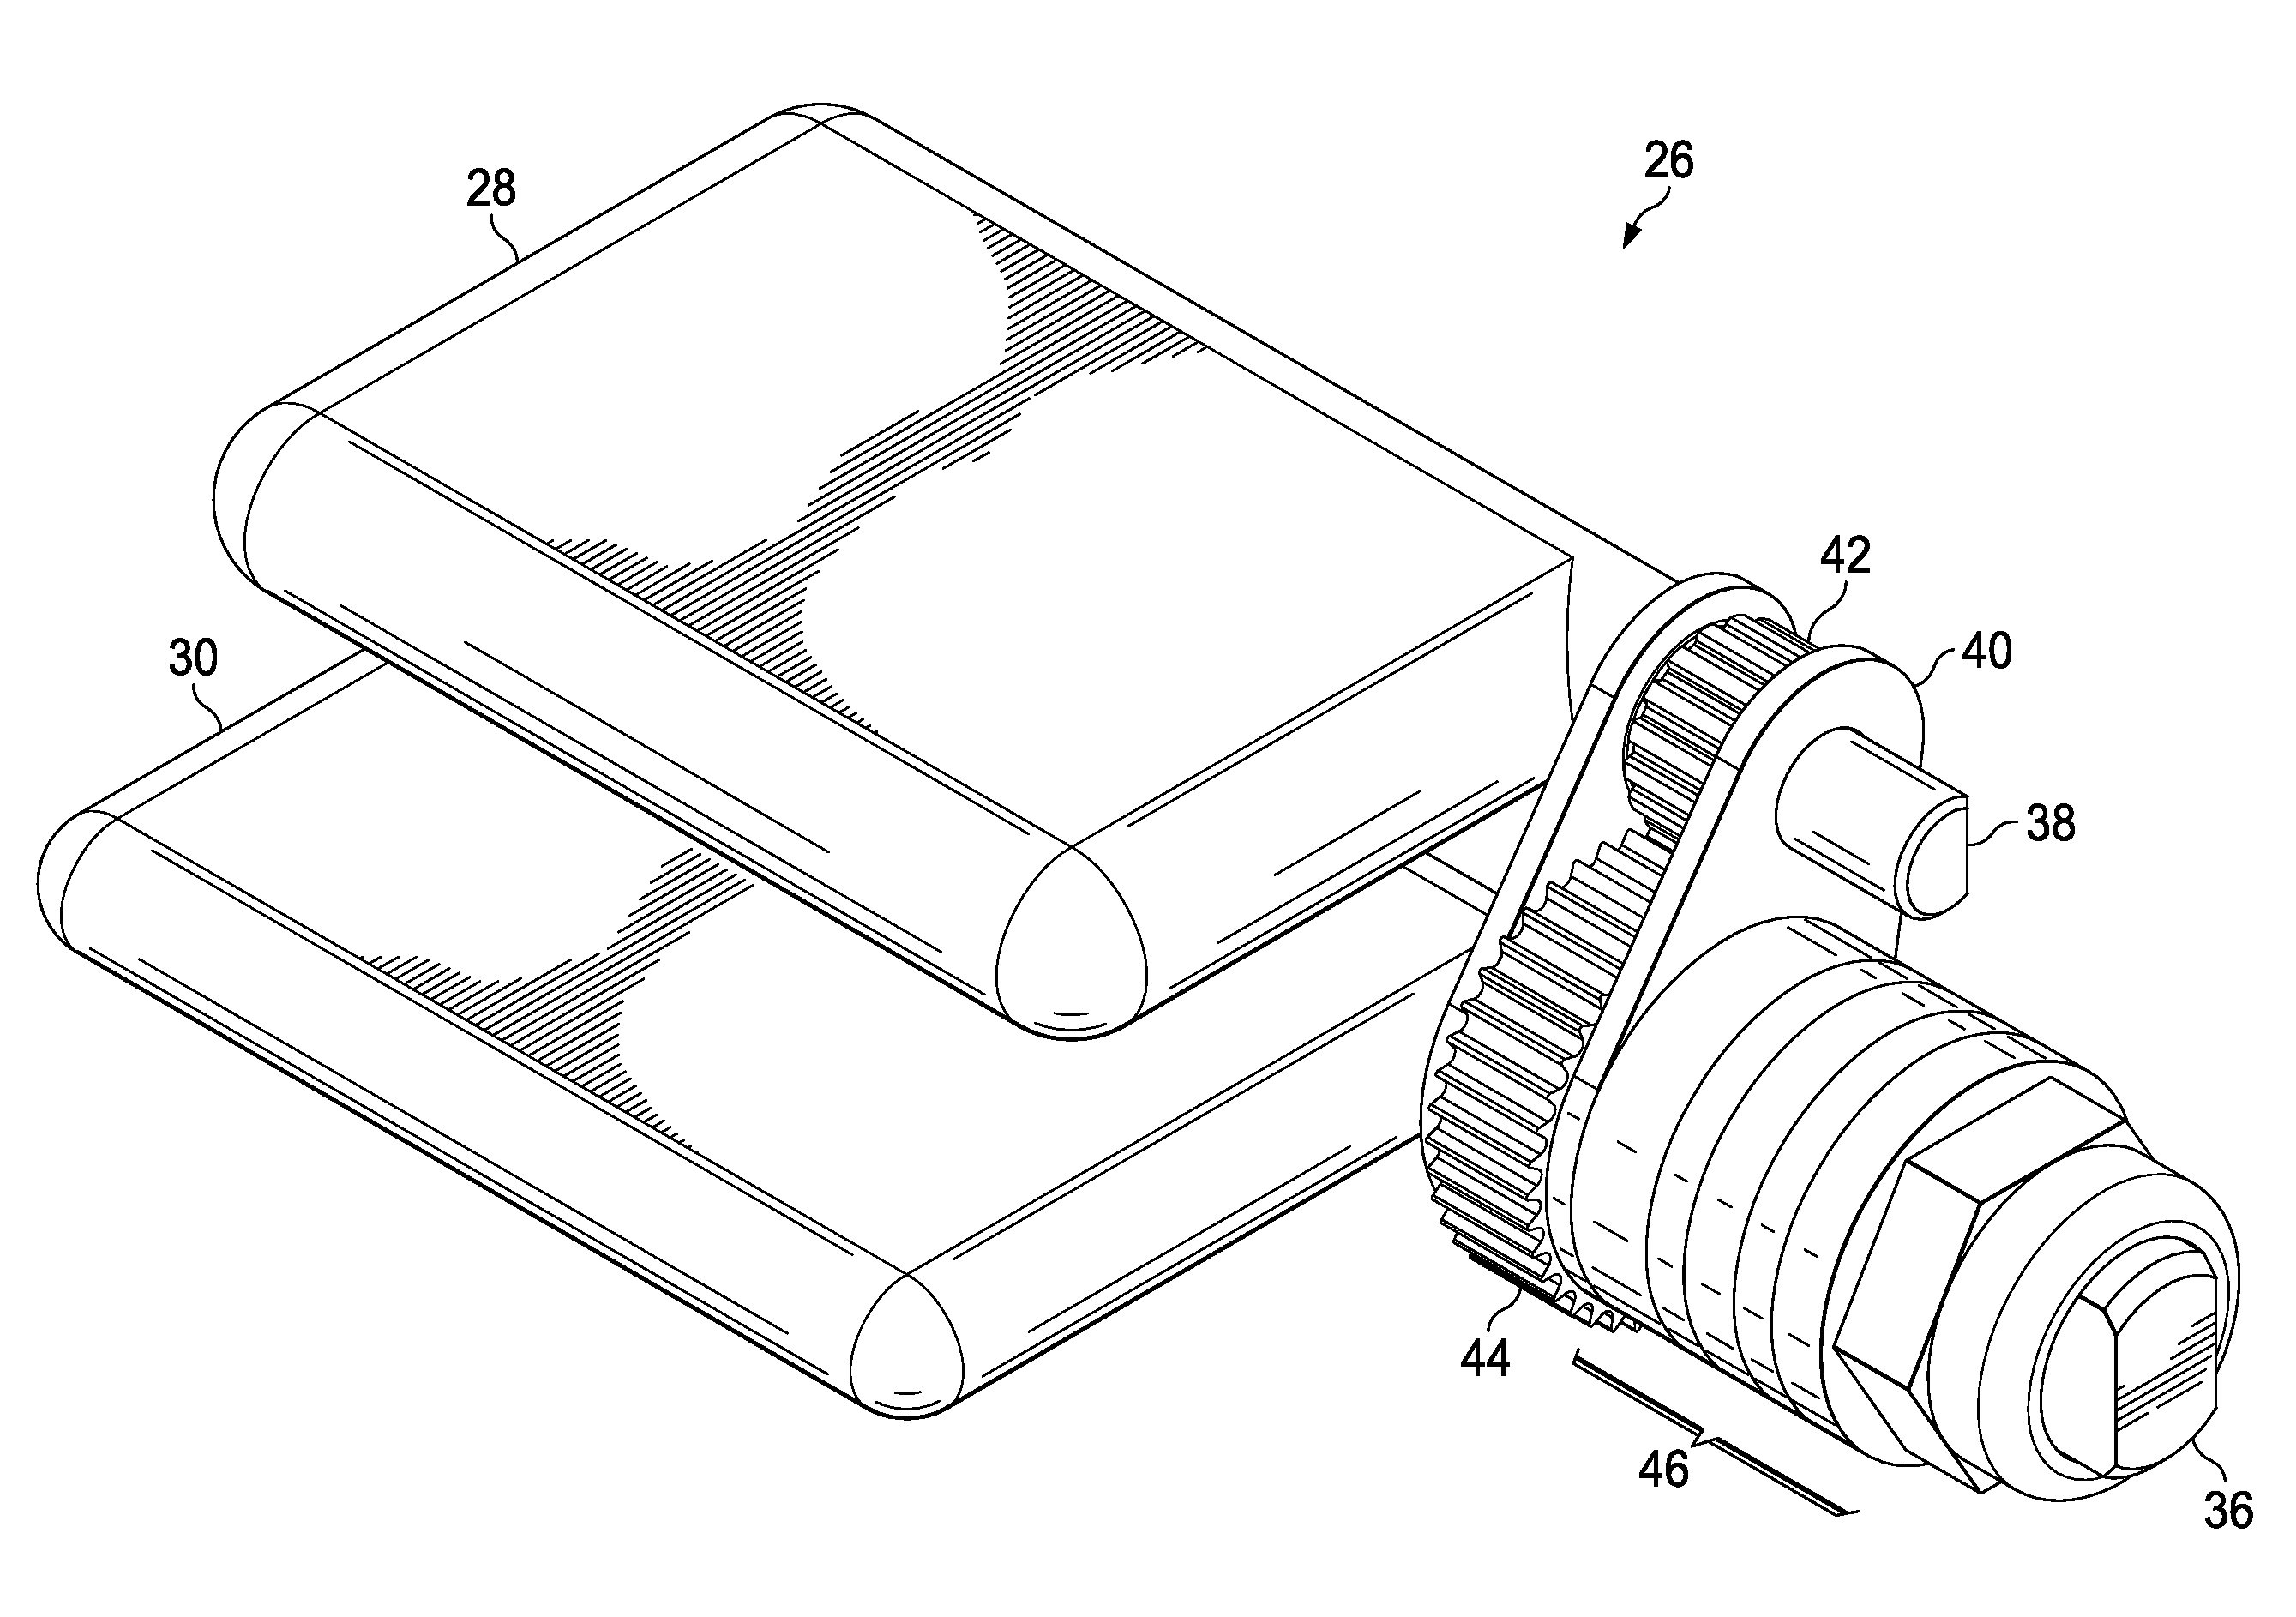 Information Handling System Housing Lid with Synchronized Motion Provided by Unequal Gears